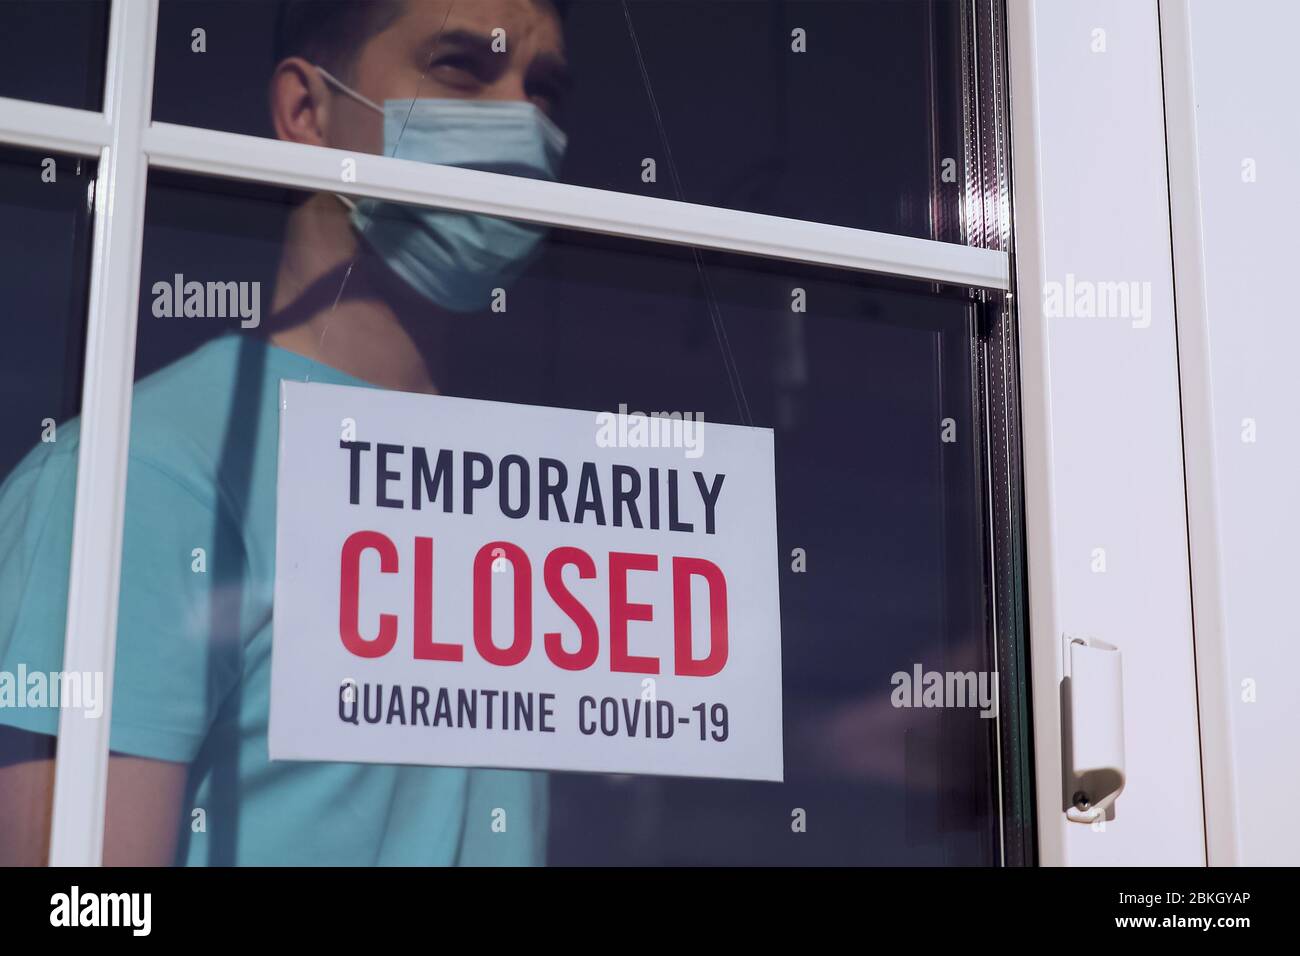 TEMPORARILY CLOSED sign on a door shop, restourant Stock Photo